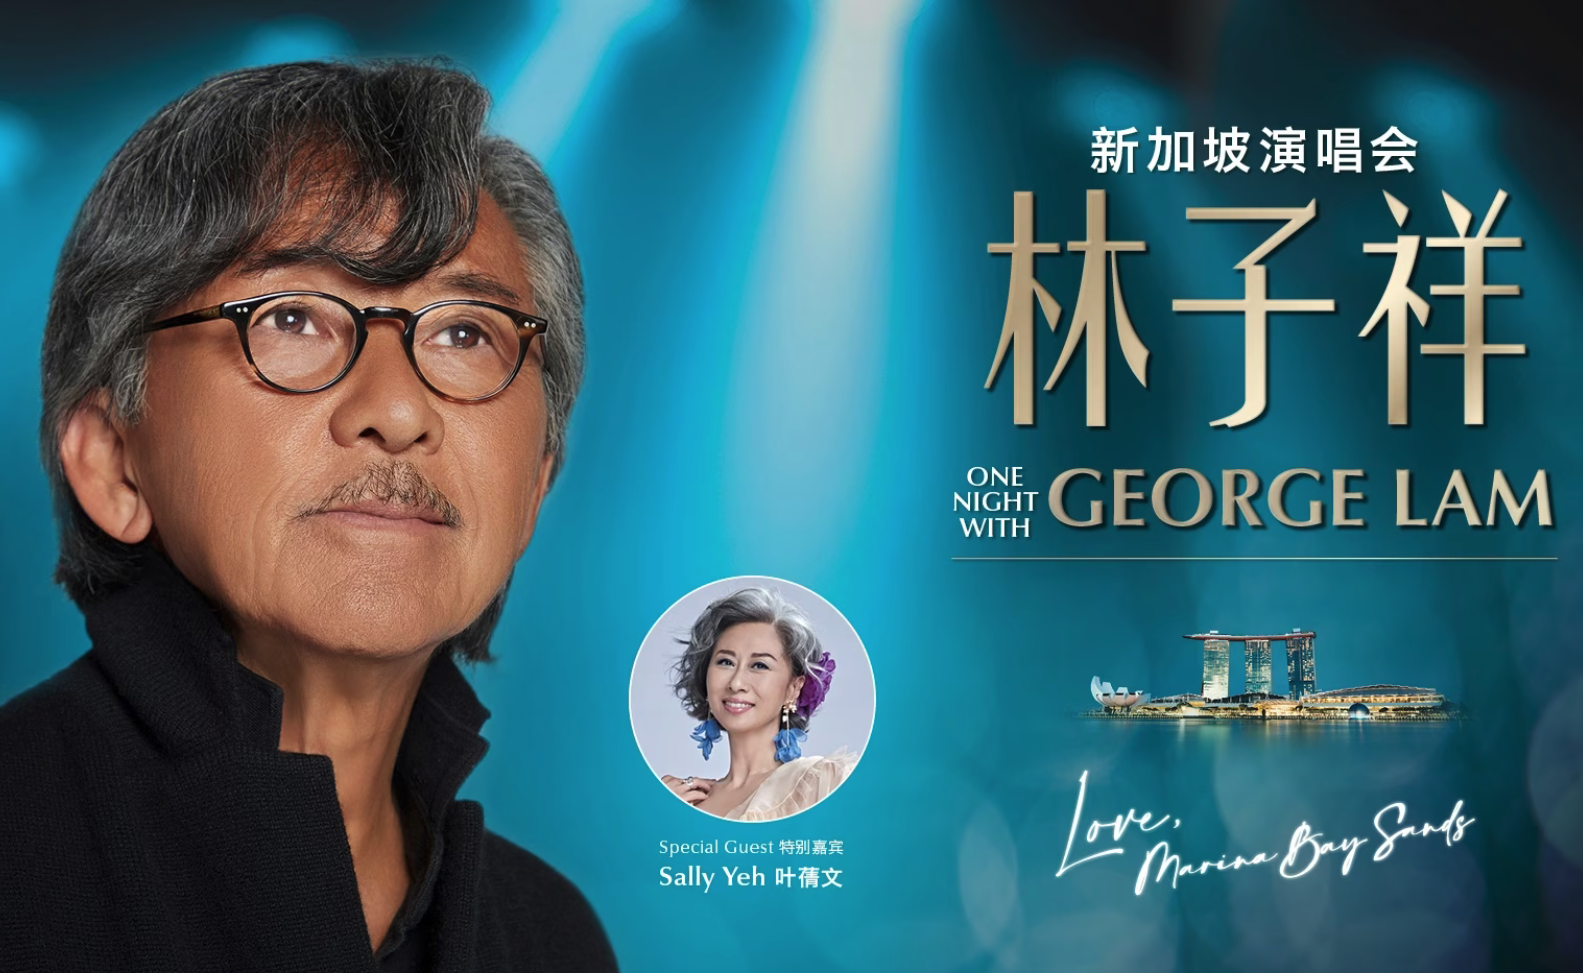 Cantopop legend George Lam returns to Singapore to perform at Marina Bay Sands for Sands Live